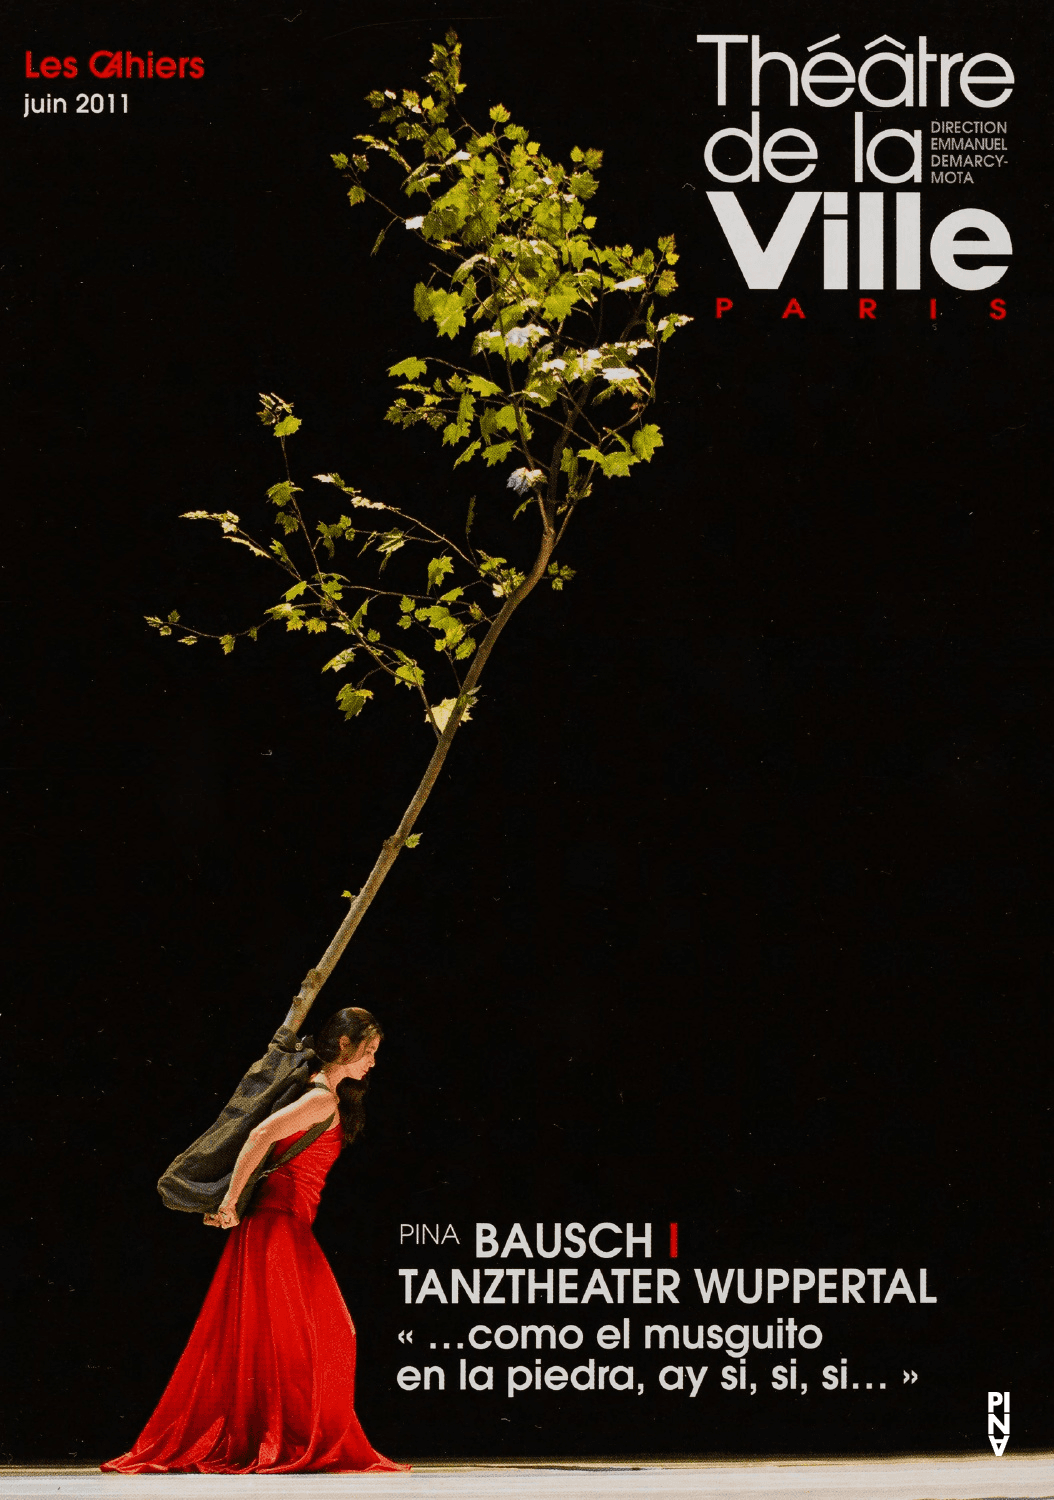 Booklet for “"... como el musguito en la piedra, ay si, si, si ..." (Like Moss on the Stone)” by Pina Bausch with Tanztheater Wuppertal in in Paris, 06/22/2011 – 07/08/2011